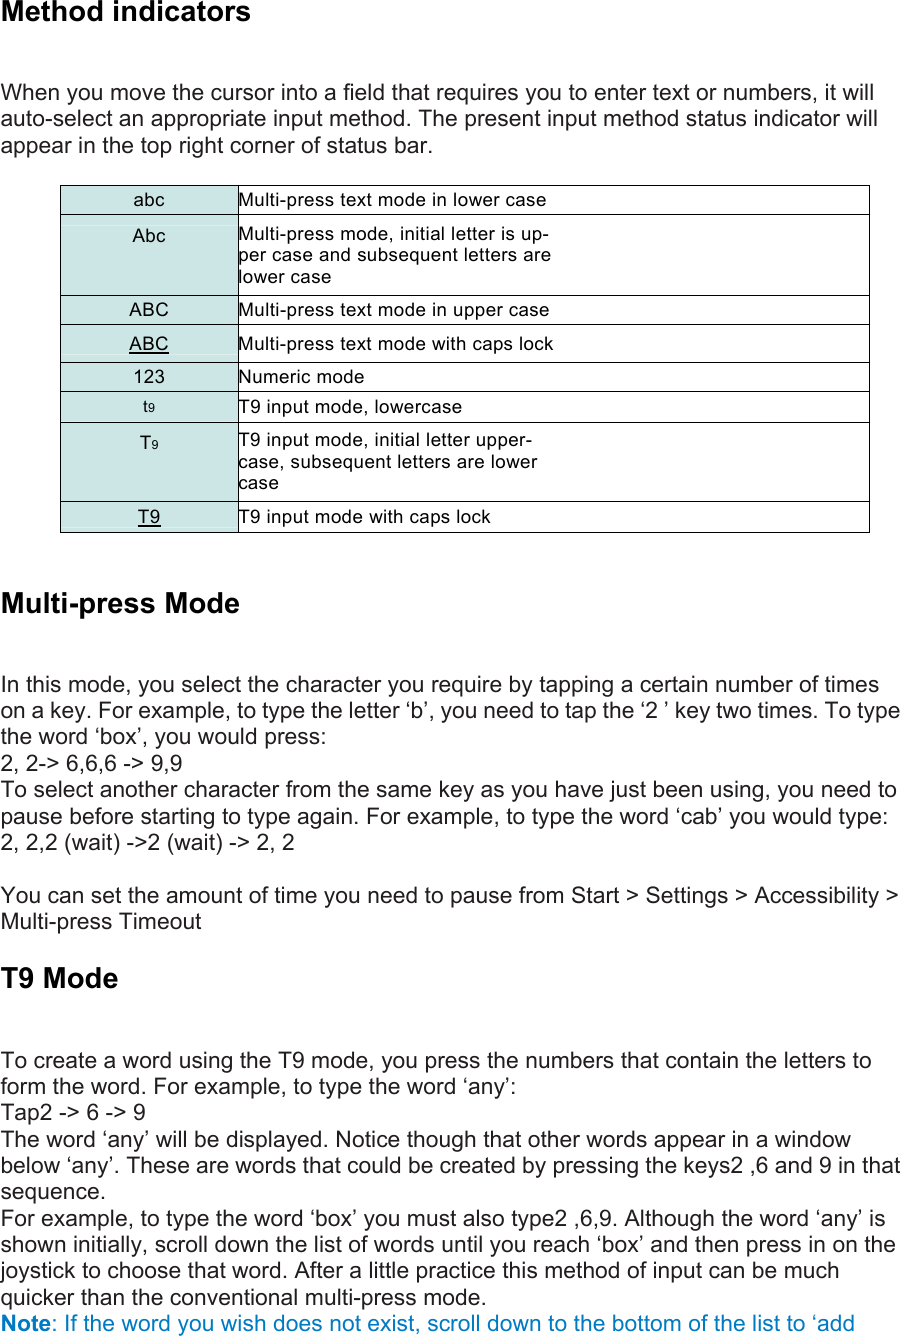 Method indicators   When you move the cursor into a field that requires you to enter text or numbers, it will auto-select an appropriate input method. The present input method status indicator will appear in the top right corner of status bar.  abc  Multi-press text mode in lower case Abc  Multi-press mode, initial letter is up- per case and subsequent letters are lower case ABC  Multi-press text mode in upper case ABC  Multi-press text mode with caps lock 123 Numeric mode t9 T9 input mode, lowercase T9 T9 input mode, initial letter upper- case, subsequent letters are lower case T9  T9 input mode with caps lock  Multi-press Mode   In this mode, you select the character you require by tapping a certain number of times on a key. For example, to type the letter ‘b’, you need to tap the ‘2 ’ key two times. To type the word ‘box’, you would press:   2, 2-&gt; 6,6,6 -&gt; 9,9   To select another character from the same key as you have just been using, you need to pause before starting to type again. For example, to type the word ‘cab’ you would type:   2, 2,2 (wait) -&gt;2 (wait) -&gt; 2, 2 You can set the amount of time you need to pause from Start &gt; Settings &gt; Accessibility &gt; Multi-press Timeout   T9 Mode   To create a word using the T9 mode, you press the numbers that contain the letters to form the word. For example, to type the word ‘any’:   Tap2 -&gt; 6 -&gt; 9   The word ‘any’ will be displayed. Notice though that other words appear in a window below ‘any’. These are words that could be created by pressing the keys2 ,6 and 9 in that sequence.  For example, to type the word ‘box’ you must also type2 ,6,9. Although the word ‘any’ is shown initially, scroll down the list of words until you reach ‘box’ and then press in on the joystick to choose that word. After a little practice this method of input can be much quicker than the conventional multi-press mode. Note: If the word you wish does not exist, scroll down to the bottom of the list to ‘add 